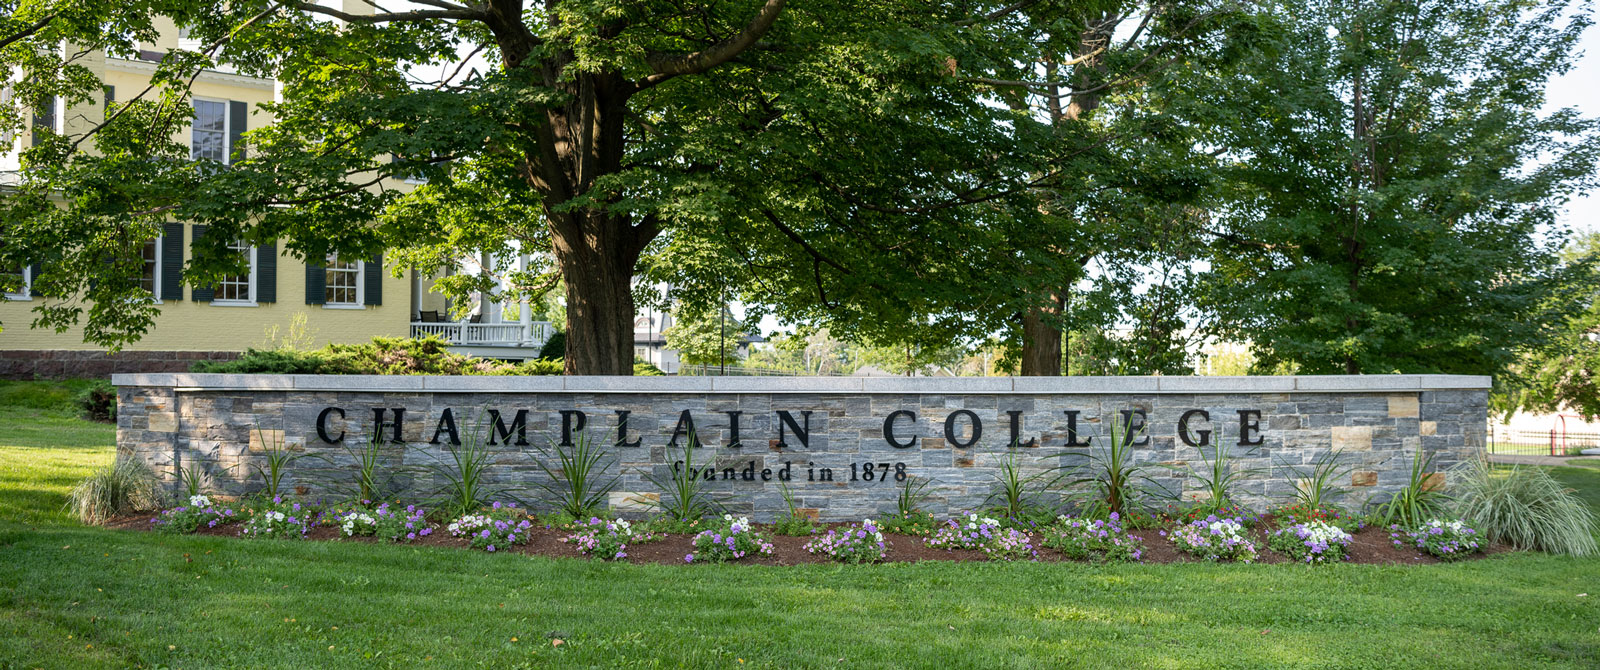 champlain-college-receives-1-million-donation-the-view